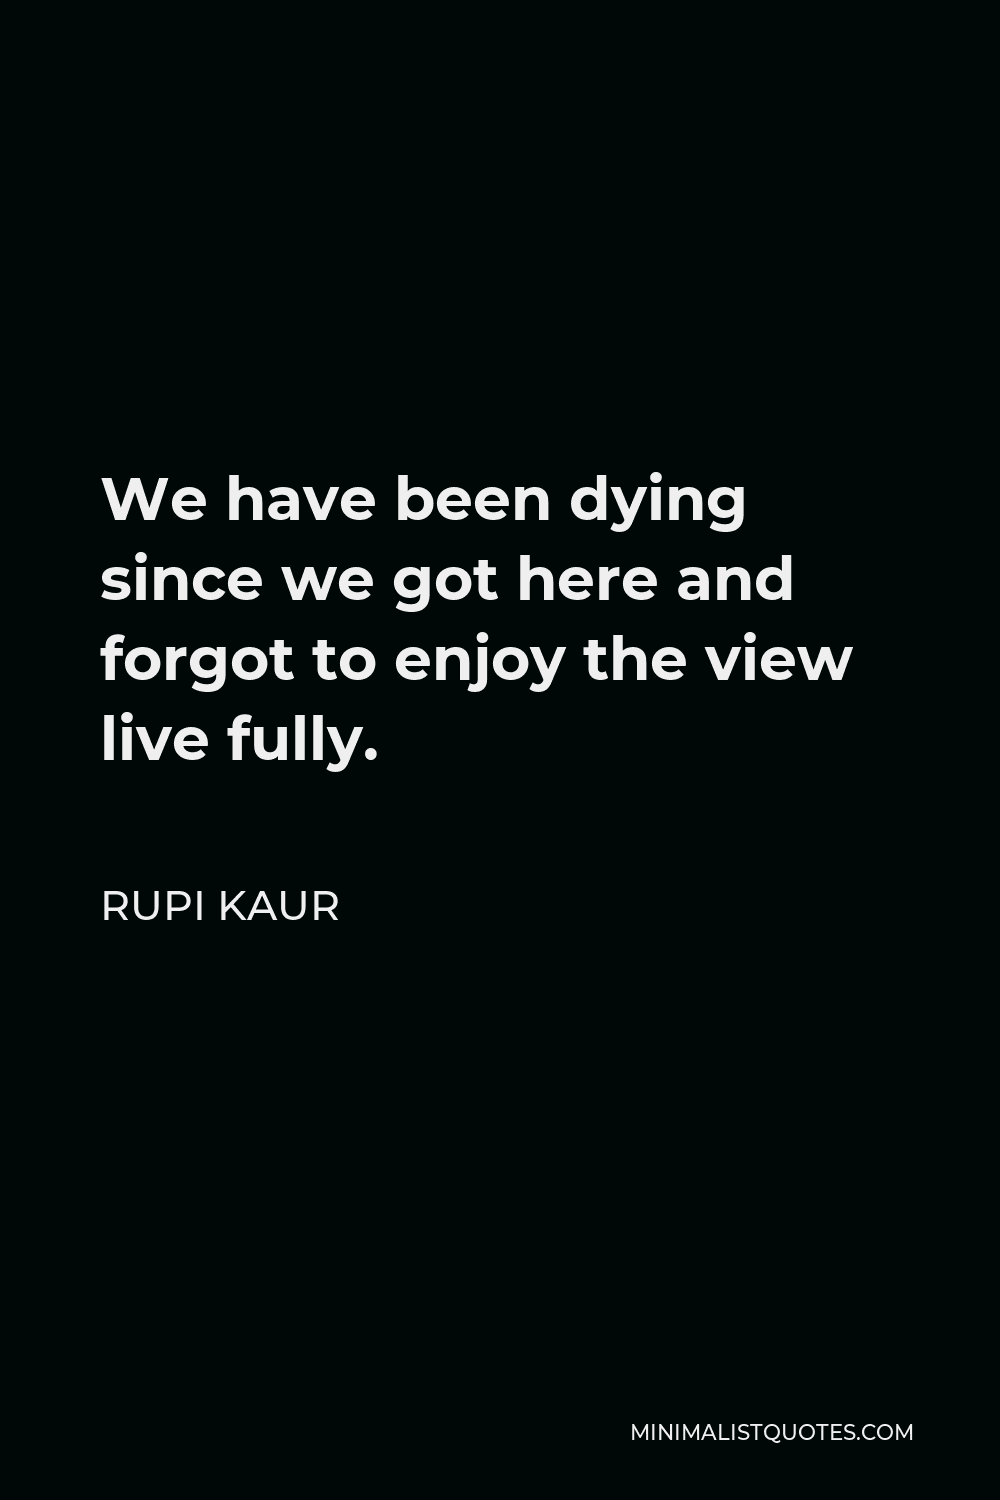 Rupi Kaur Quote - We have been dying since we got here and forgot to enjoy the view live fully.